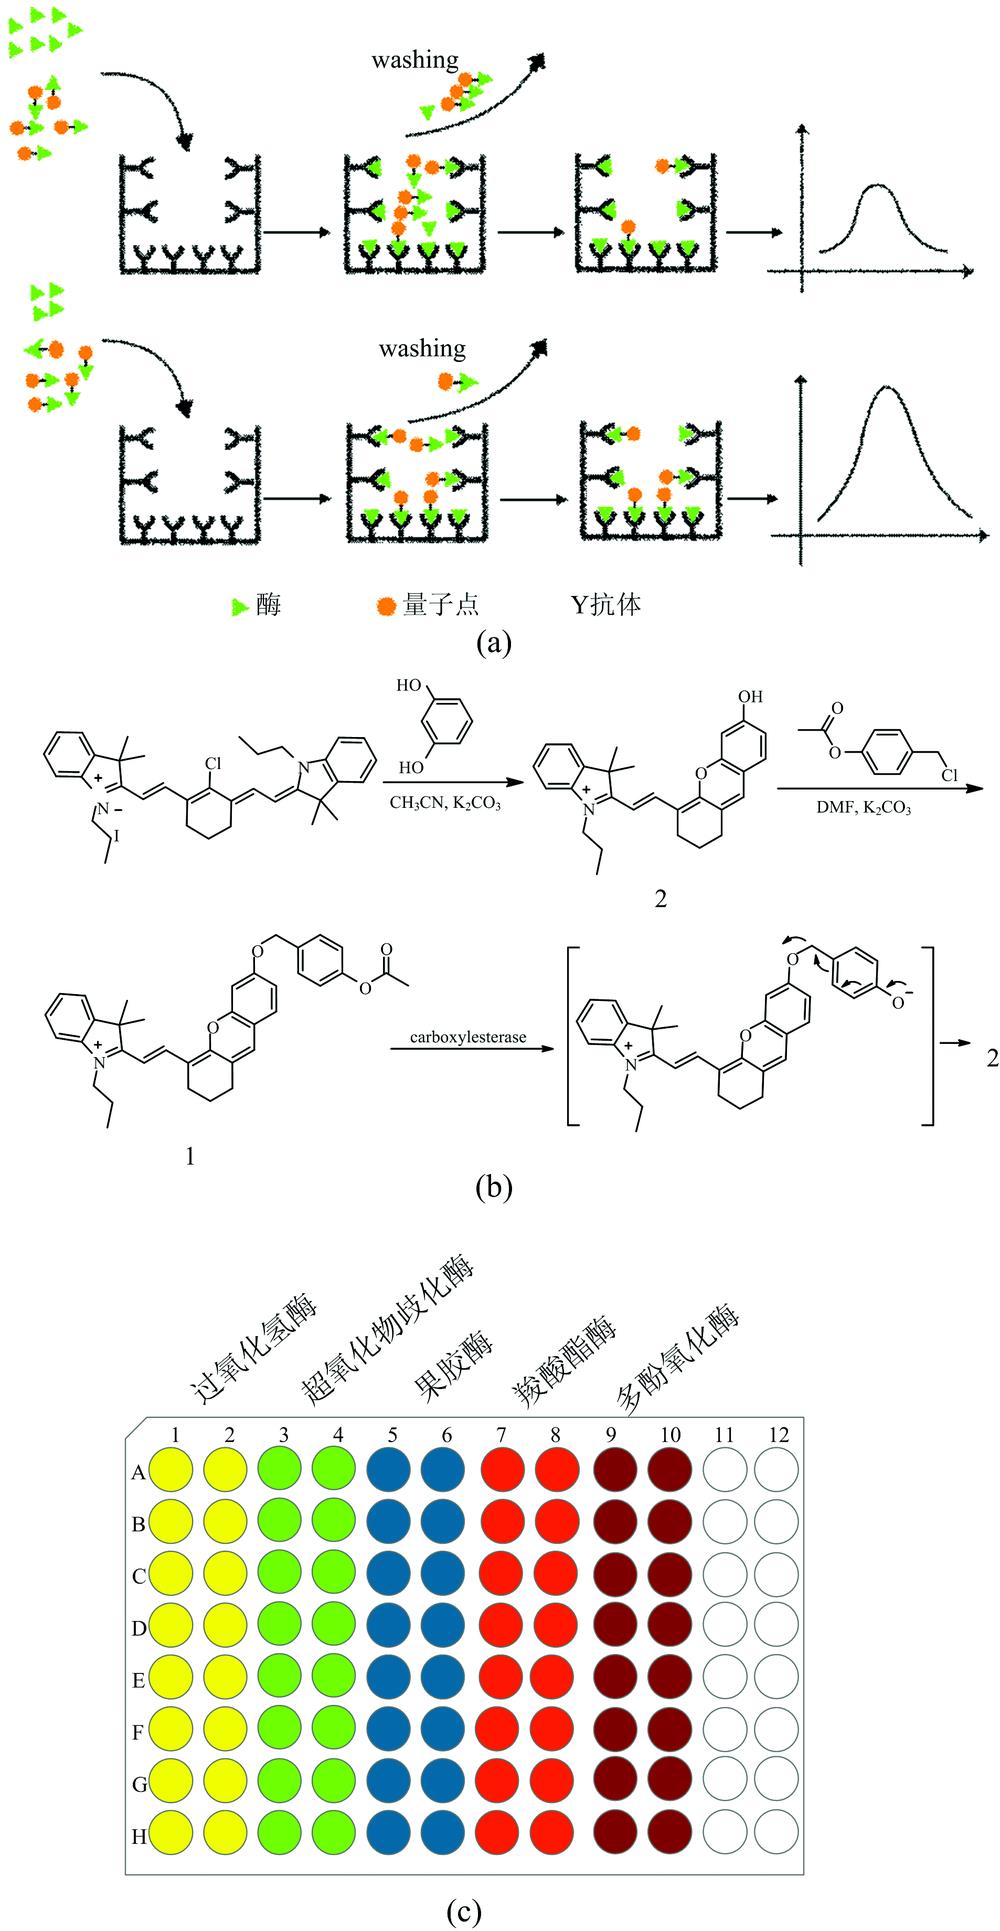 (a) Principle of fluorescence immunoassay; (b) Synthesis of probe and its reaction with carboxylesterase; (c) Schematic of simultaneous detection of multiple enzymes